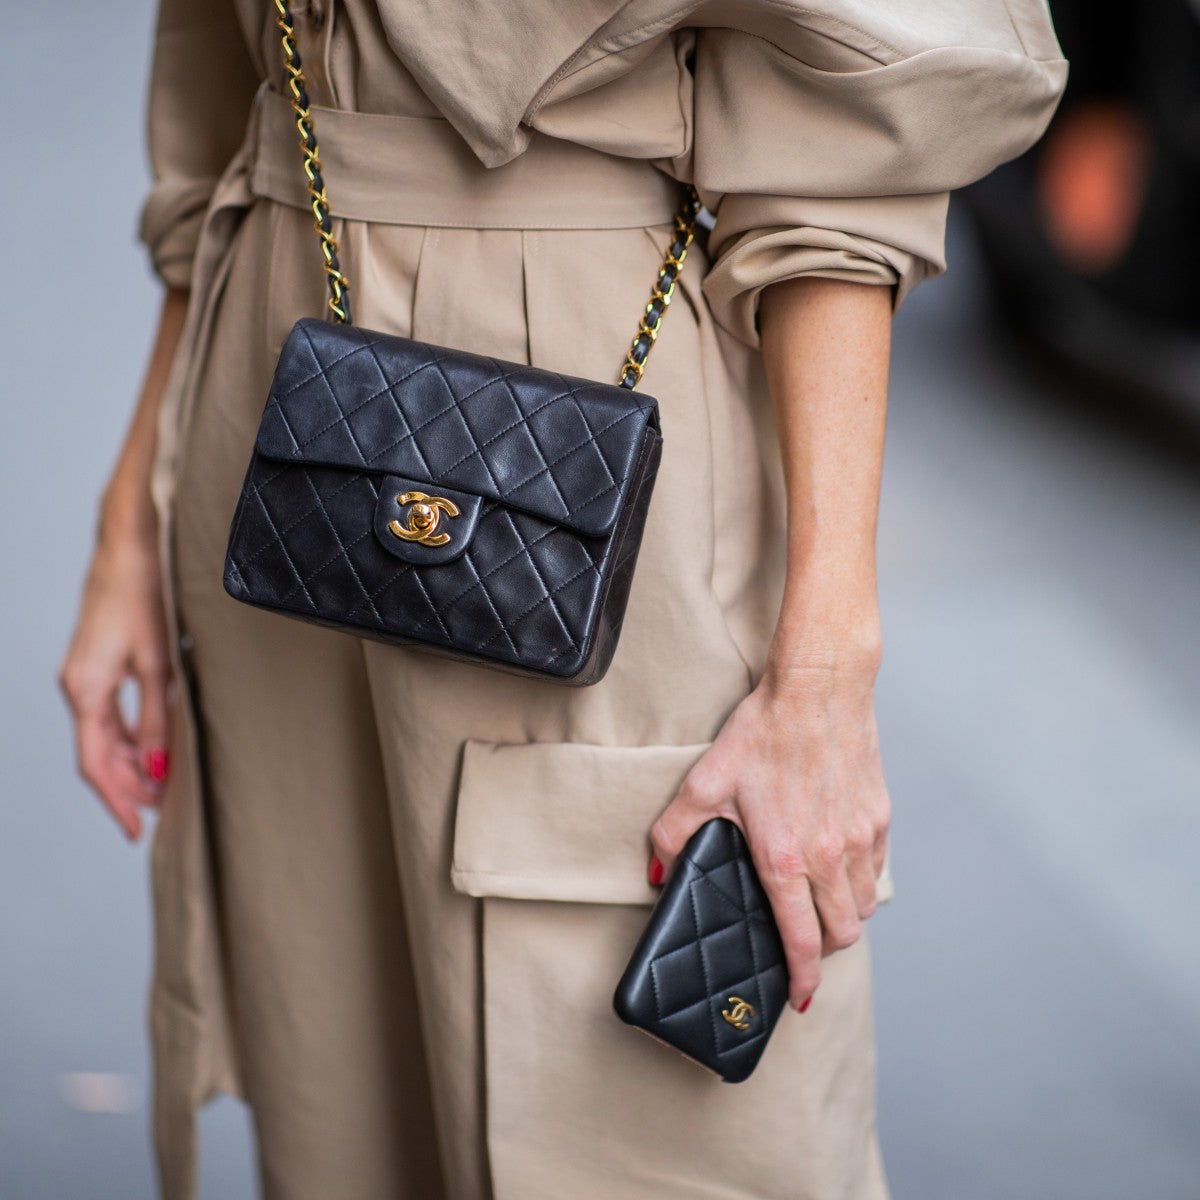 Vintage Chanel vs. New - Why Vintage Chanel is Having a Moment